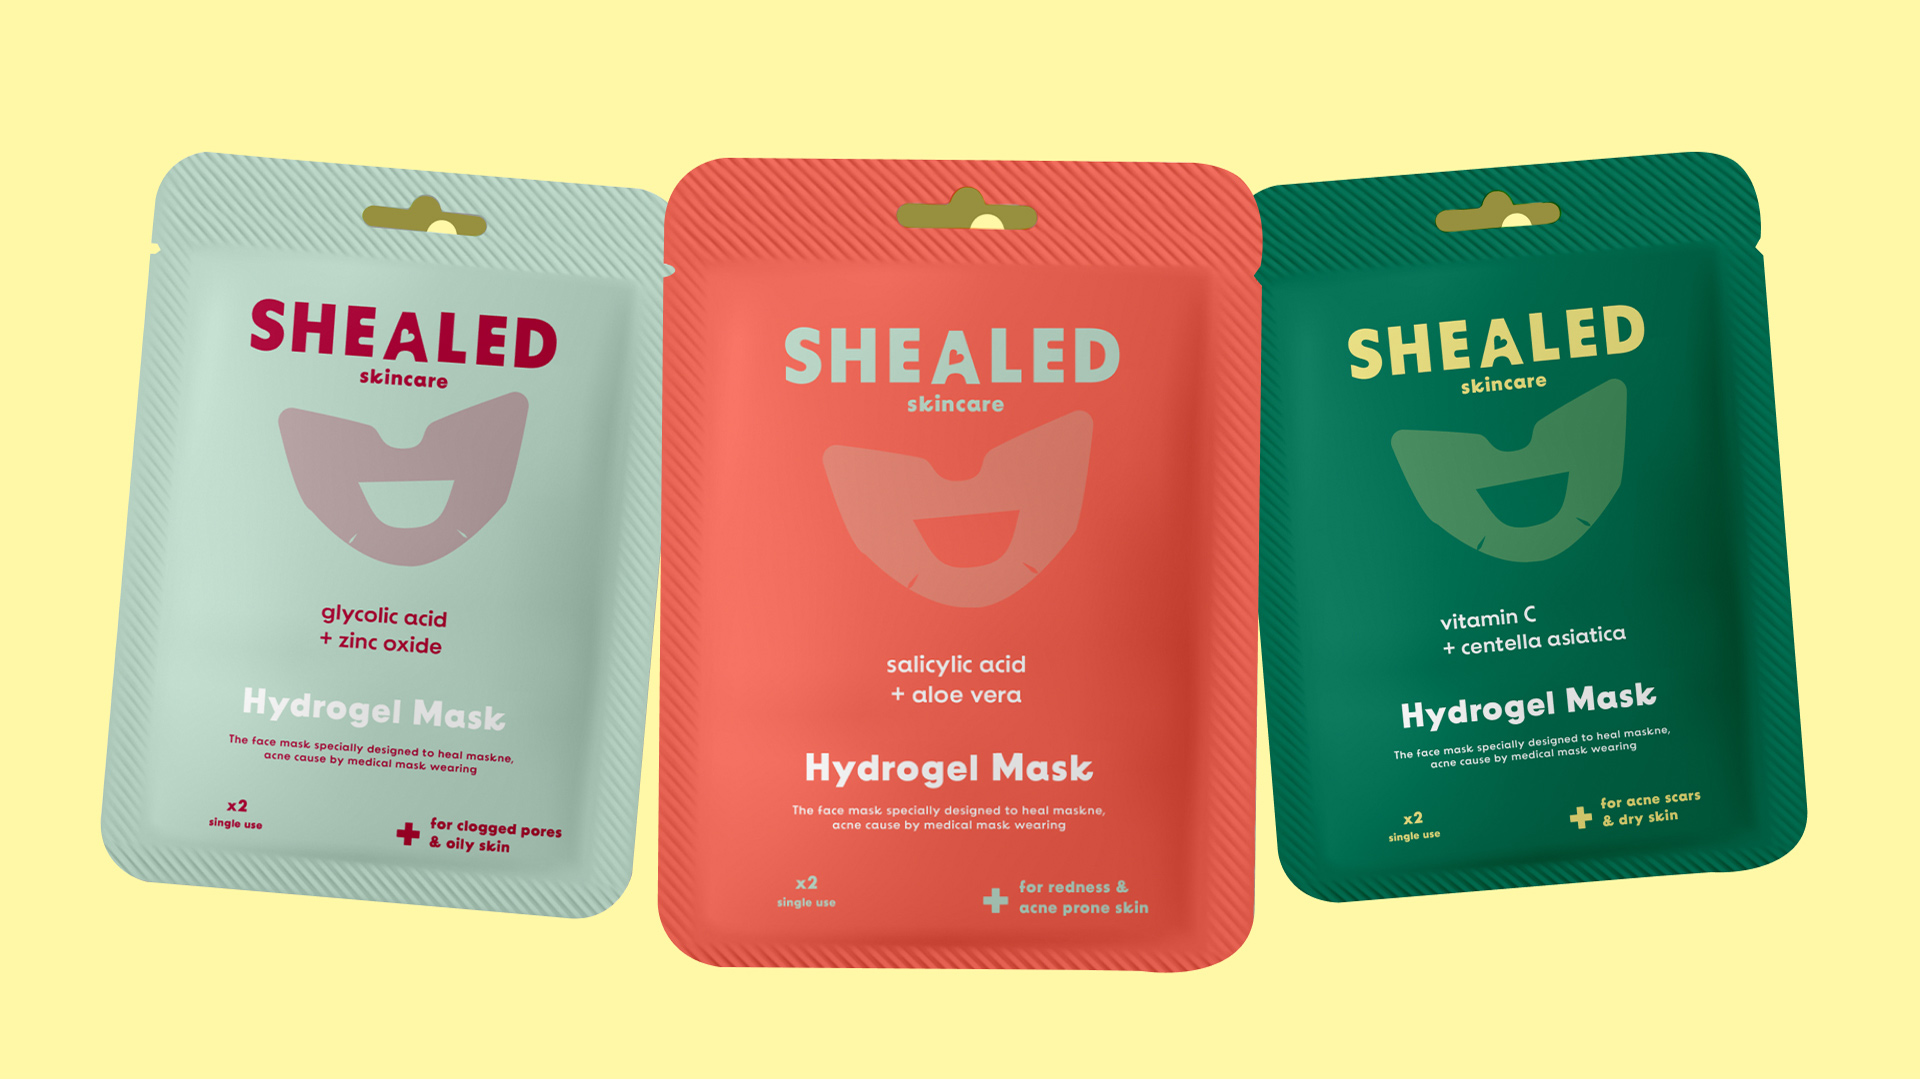 A display of 3 face mask packaging for the Shealed skincare line.